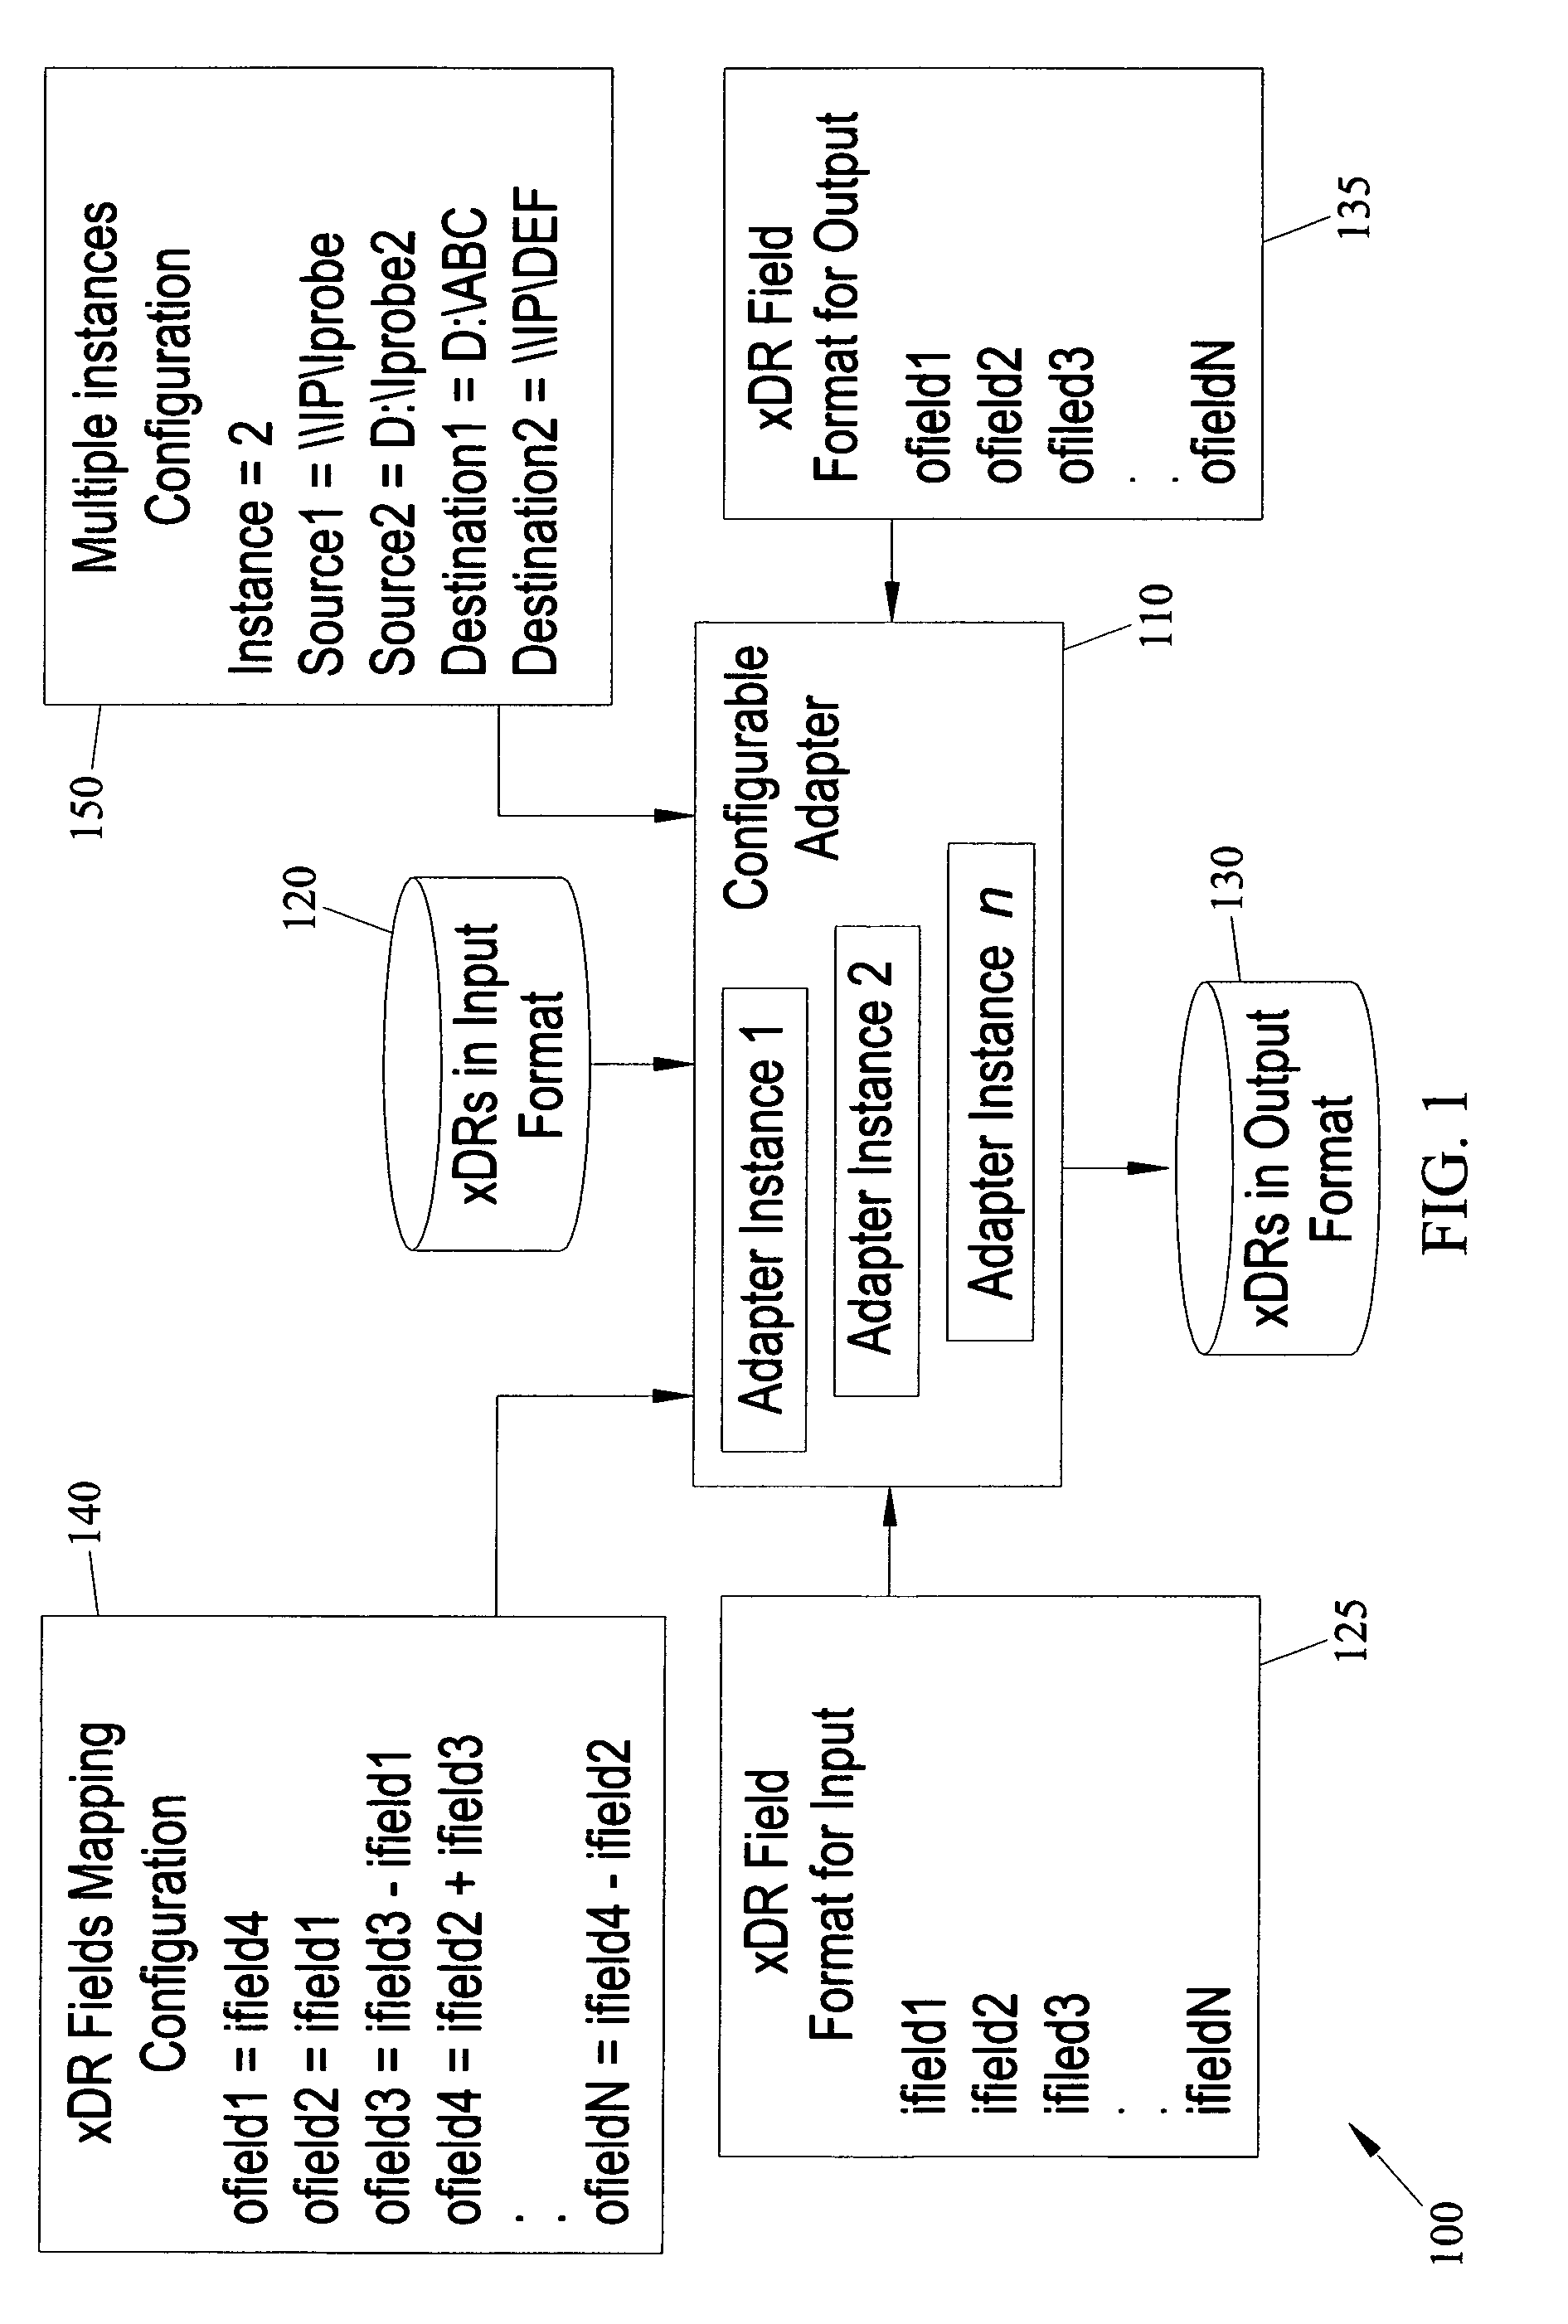 Methods, systems, and computer program products for providing configurable telecommunications detail record adapter